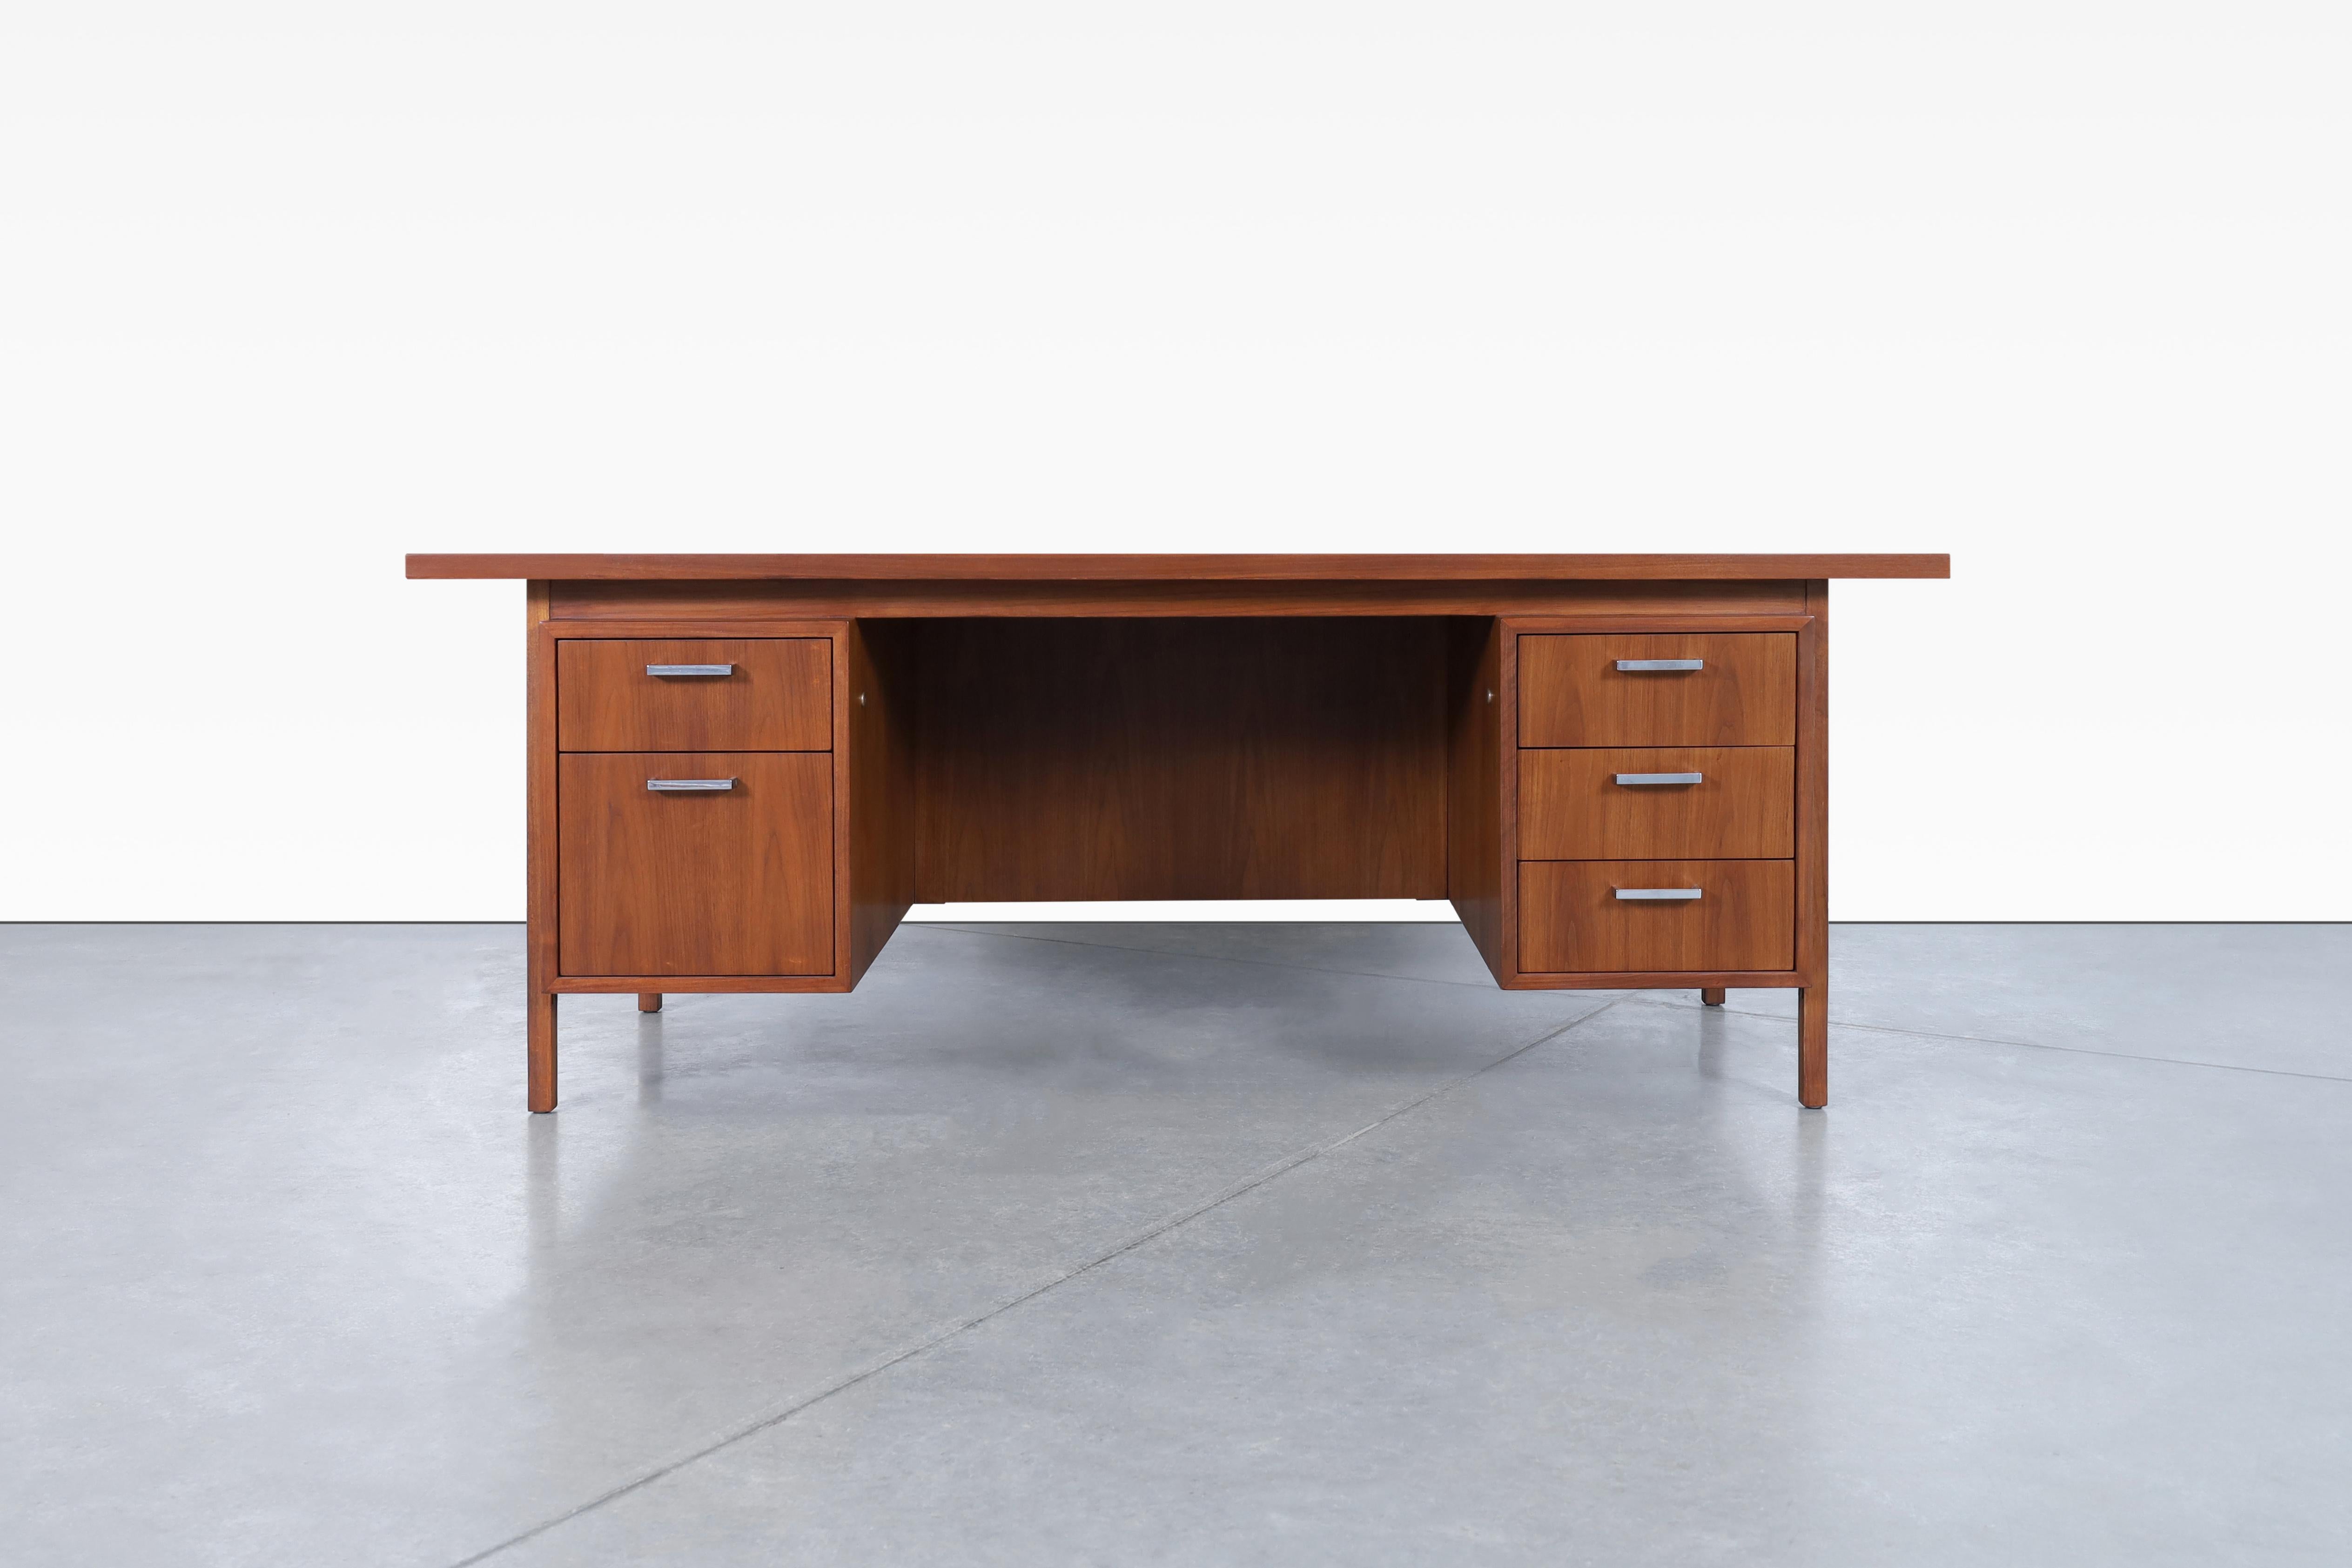 Stunning mid-century modern walnut executive desk made in the USA, circa 1960's. This desk features a well-crafted walnut design accented by elegant chrome handles. Designed with functionality in mind, it has four drawers and a spacious file drawer,